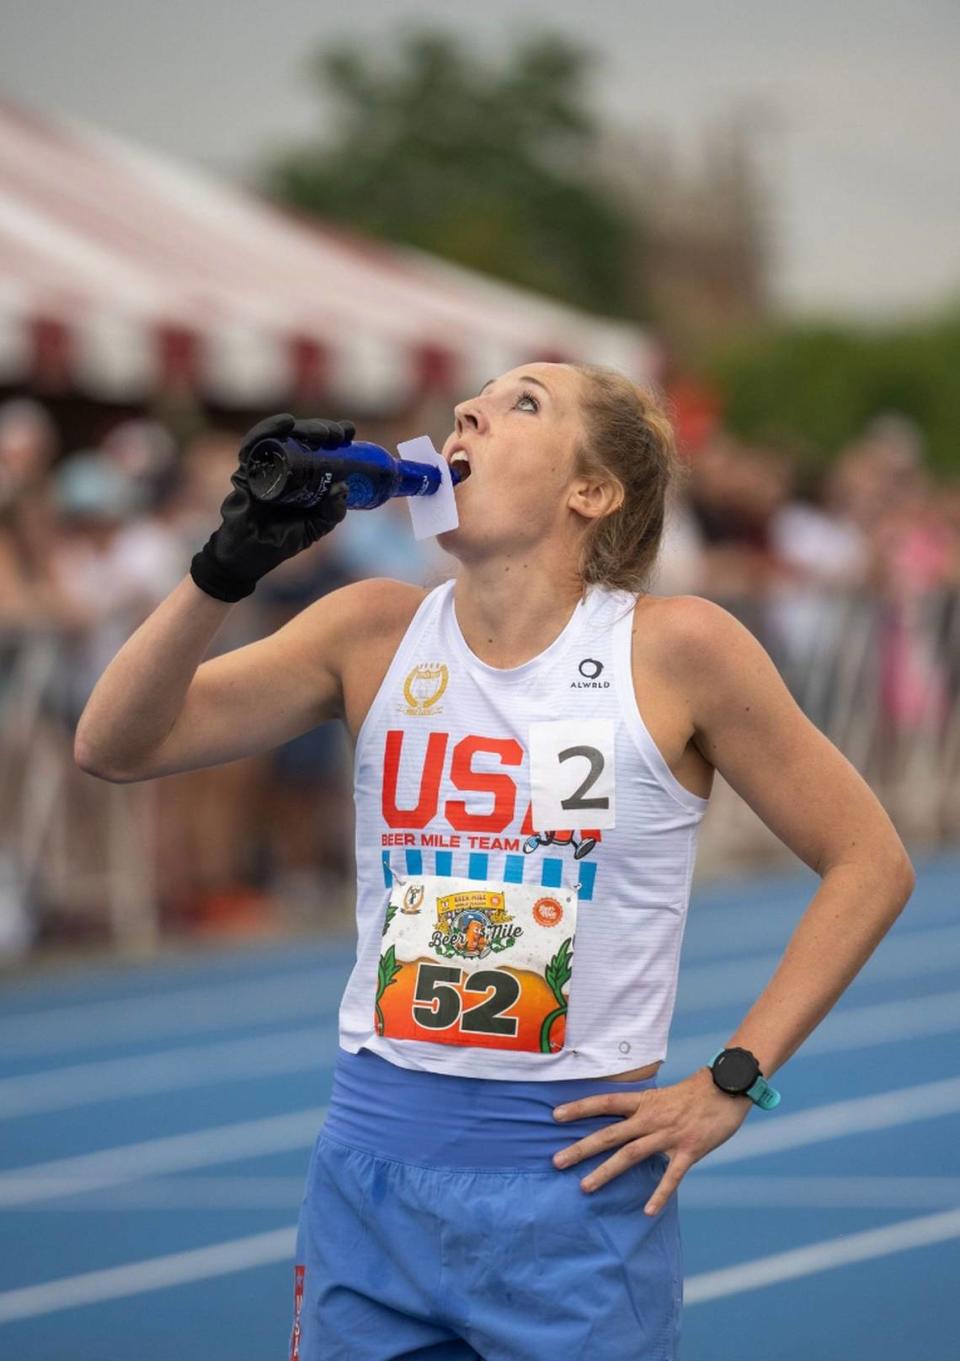 Elizabeth Laseter chugs a beer at the Beer Mile World Classic in Chicago this past July. Elvis Marin